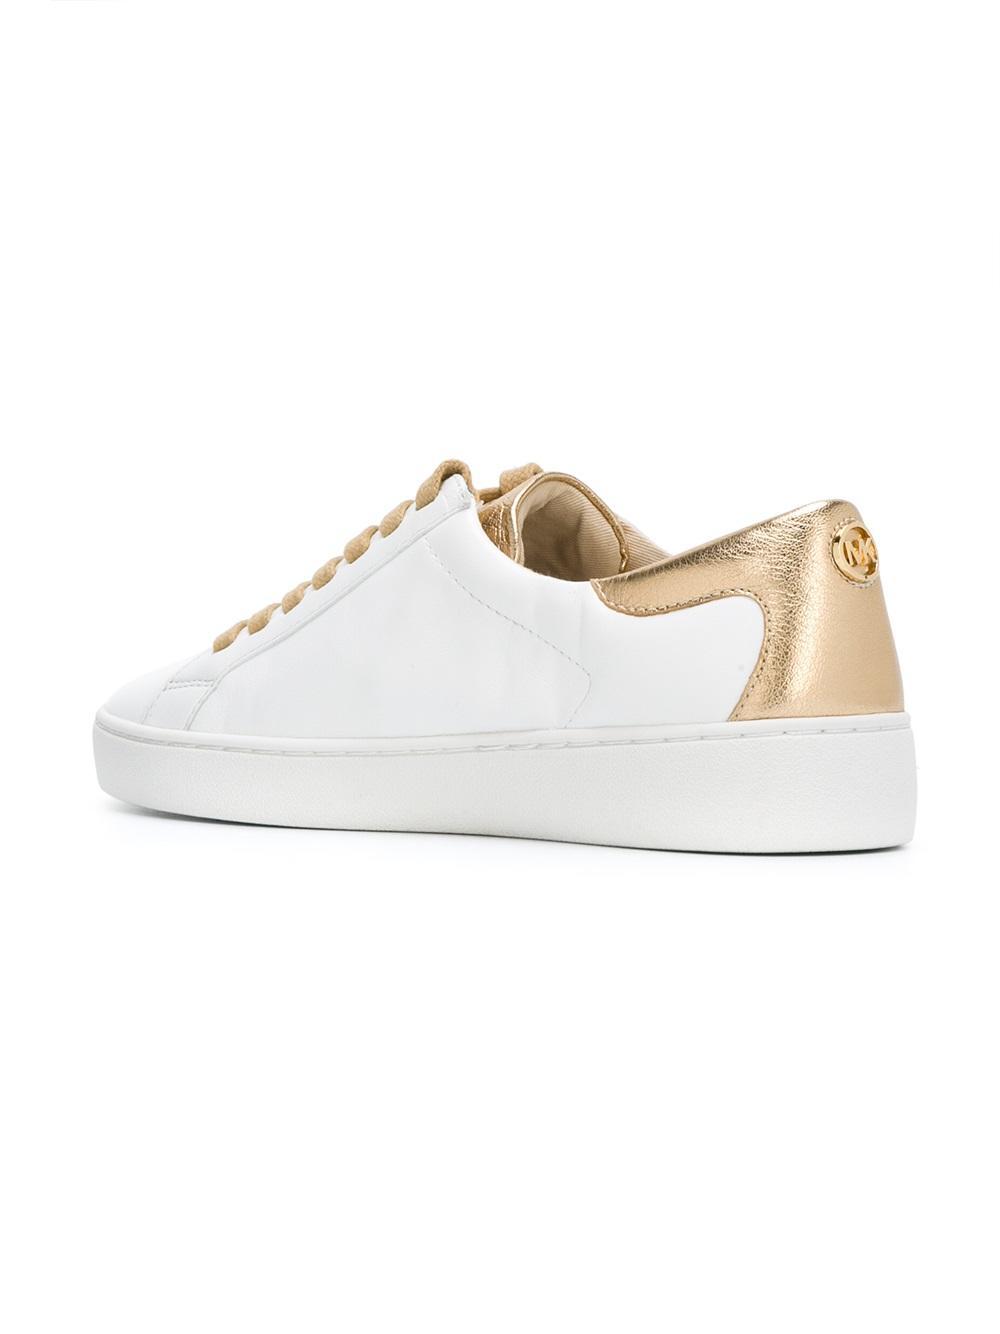 Michael Kors White And Gold Tennis Shoes Flash Sales, SAVE 55%.